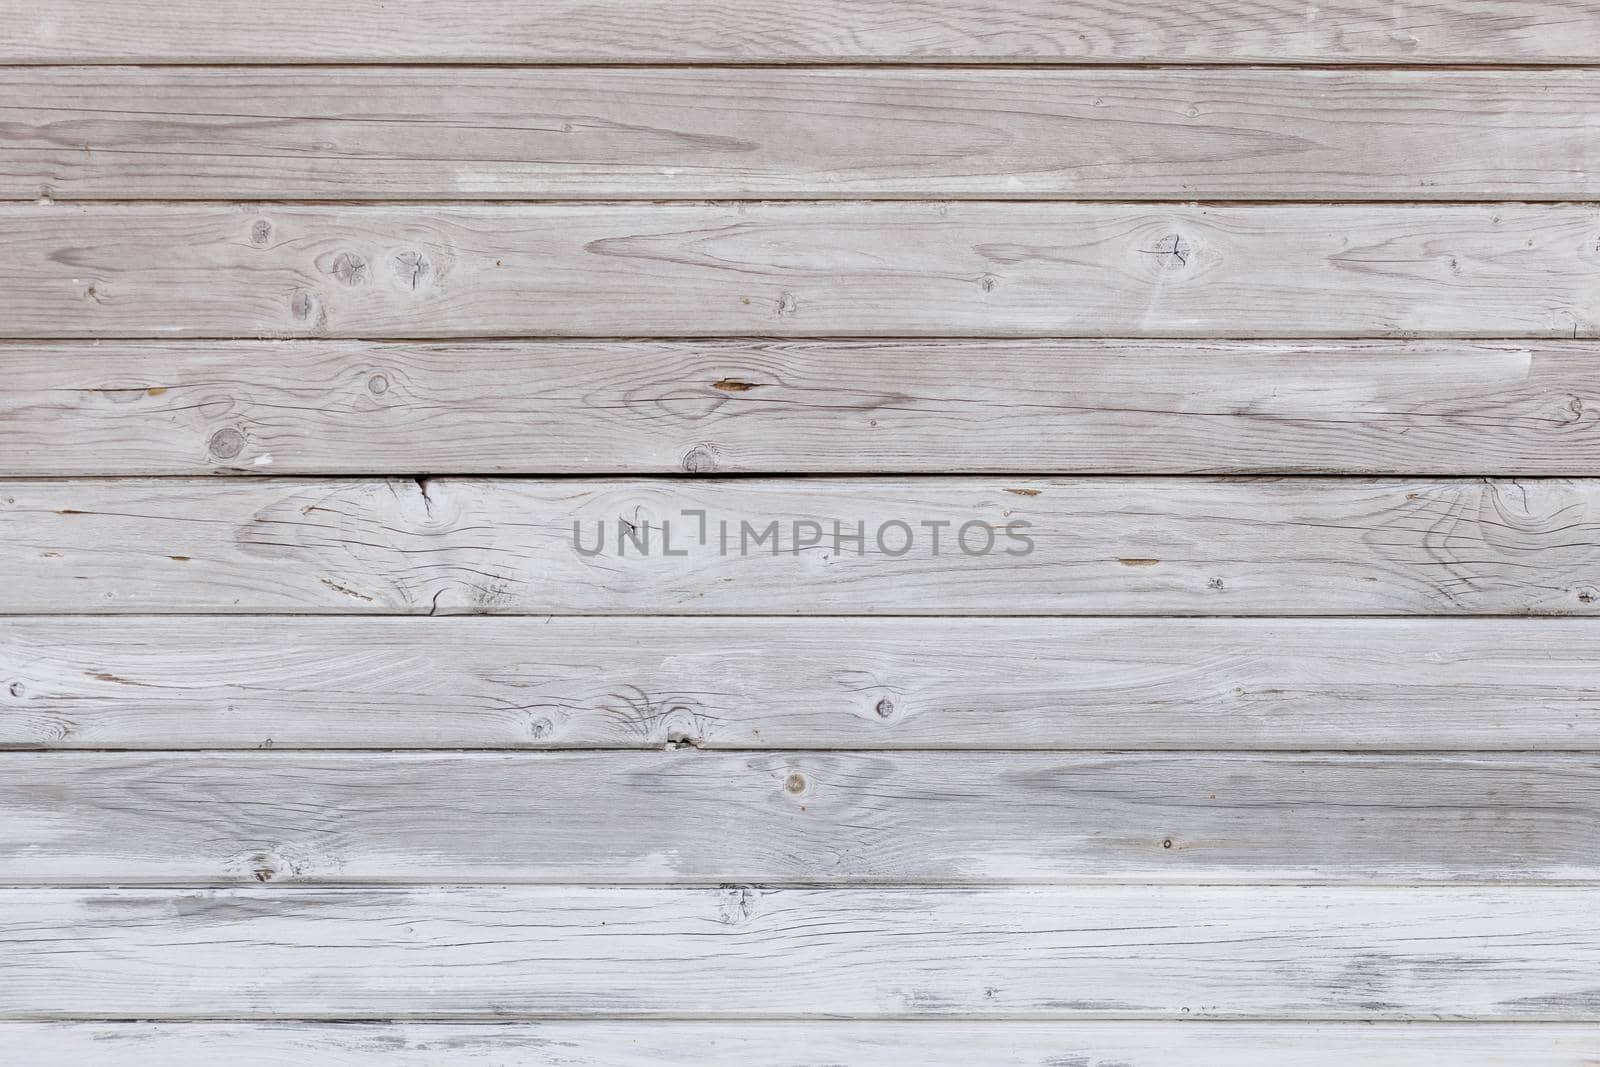 weathered white painted wooden planks board - flat full-frame background and texture with horizontal structure